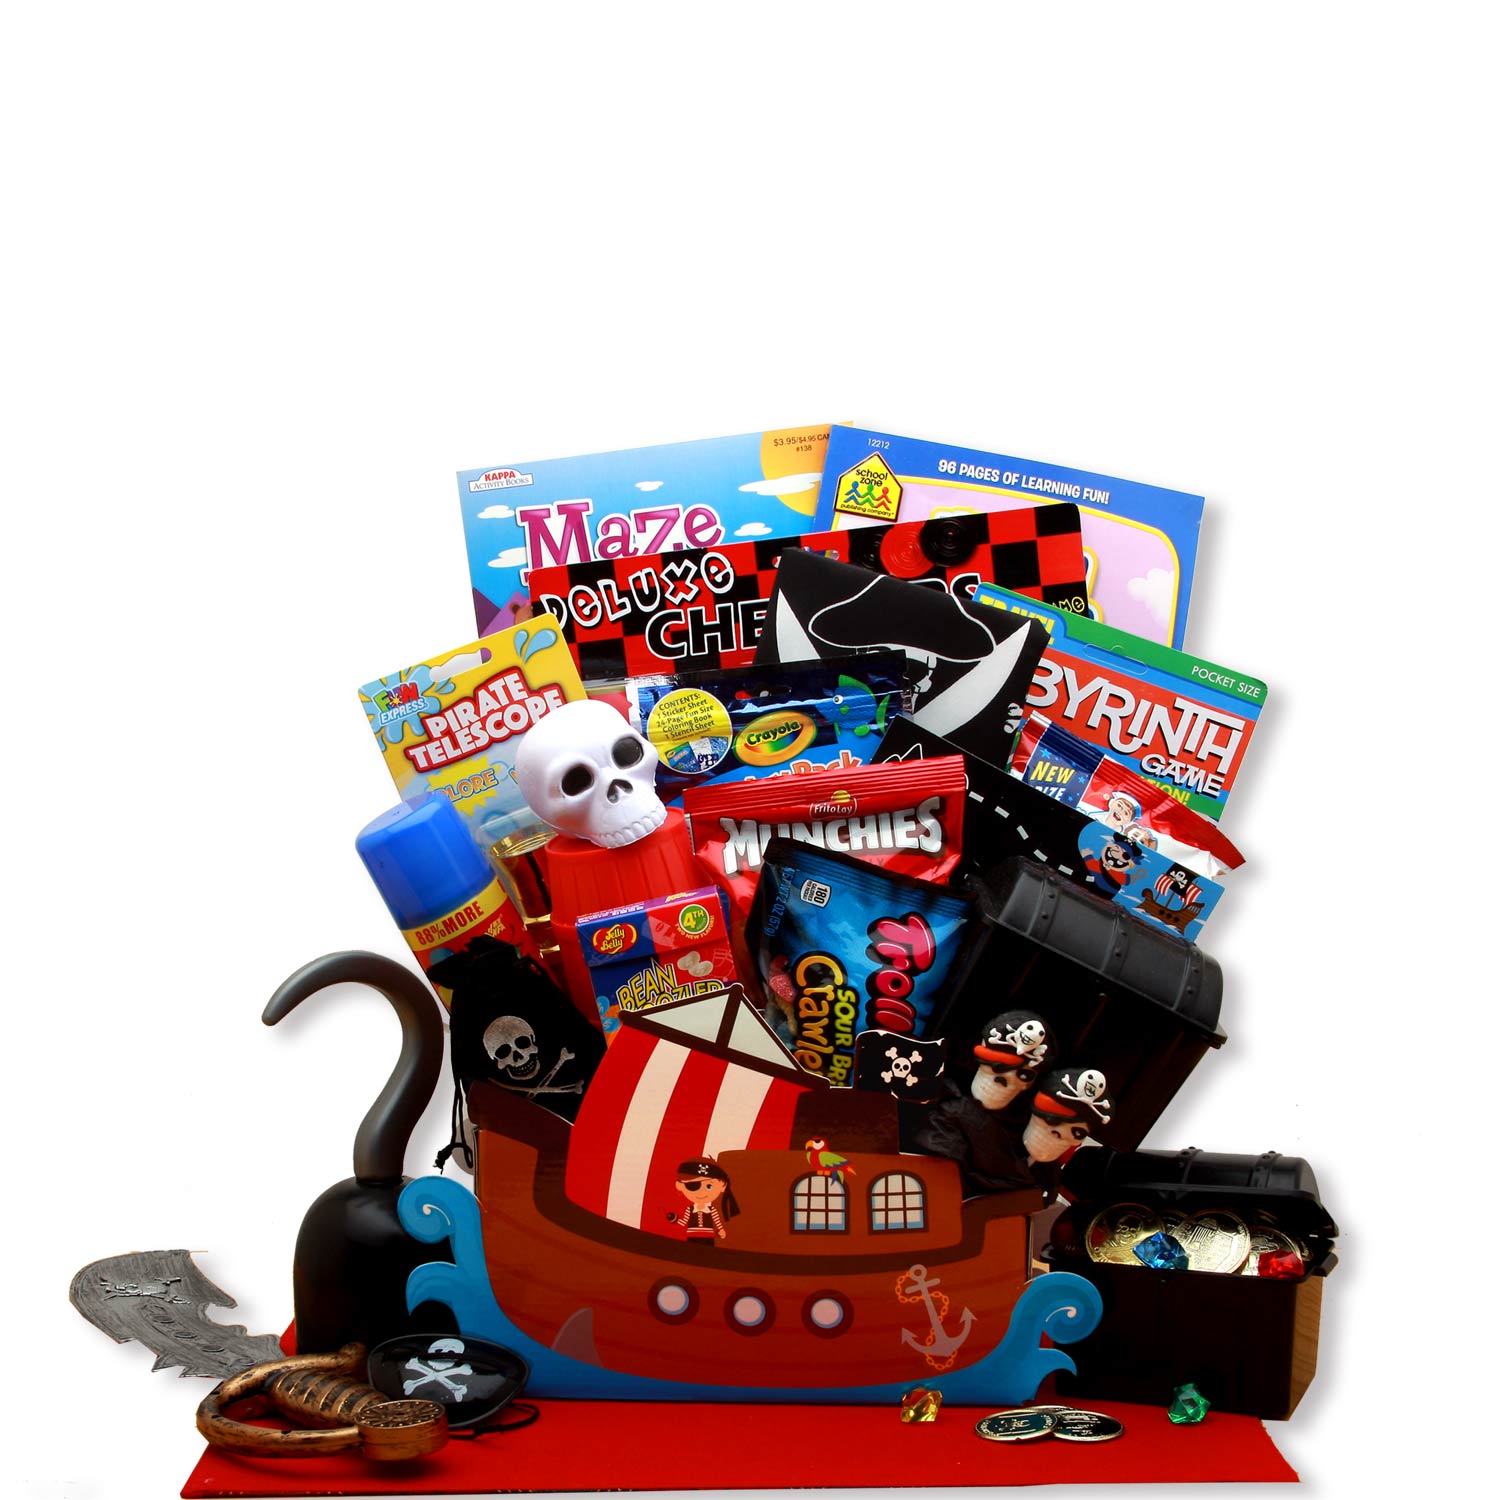 A Pirate's Life Gift Box - Children's Gift Basket